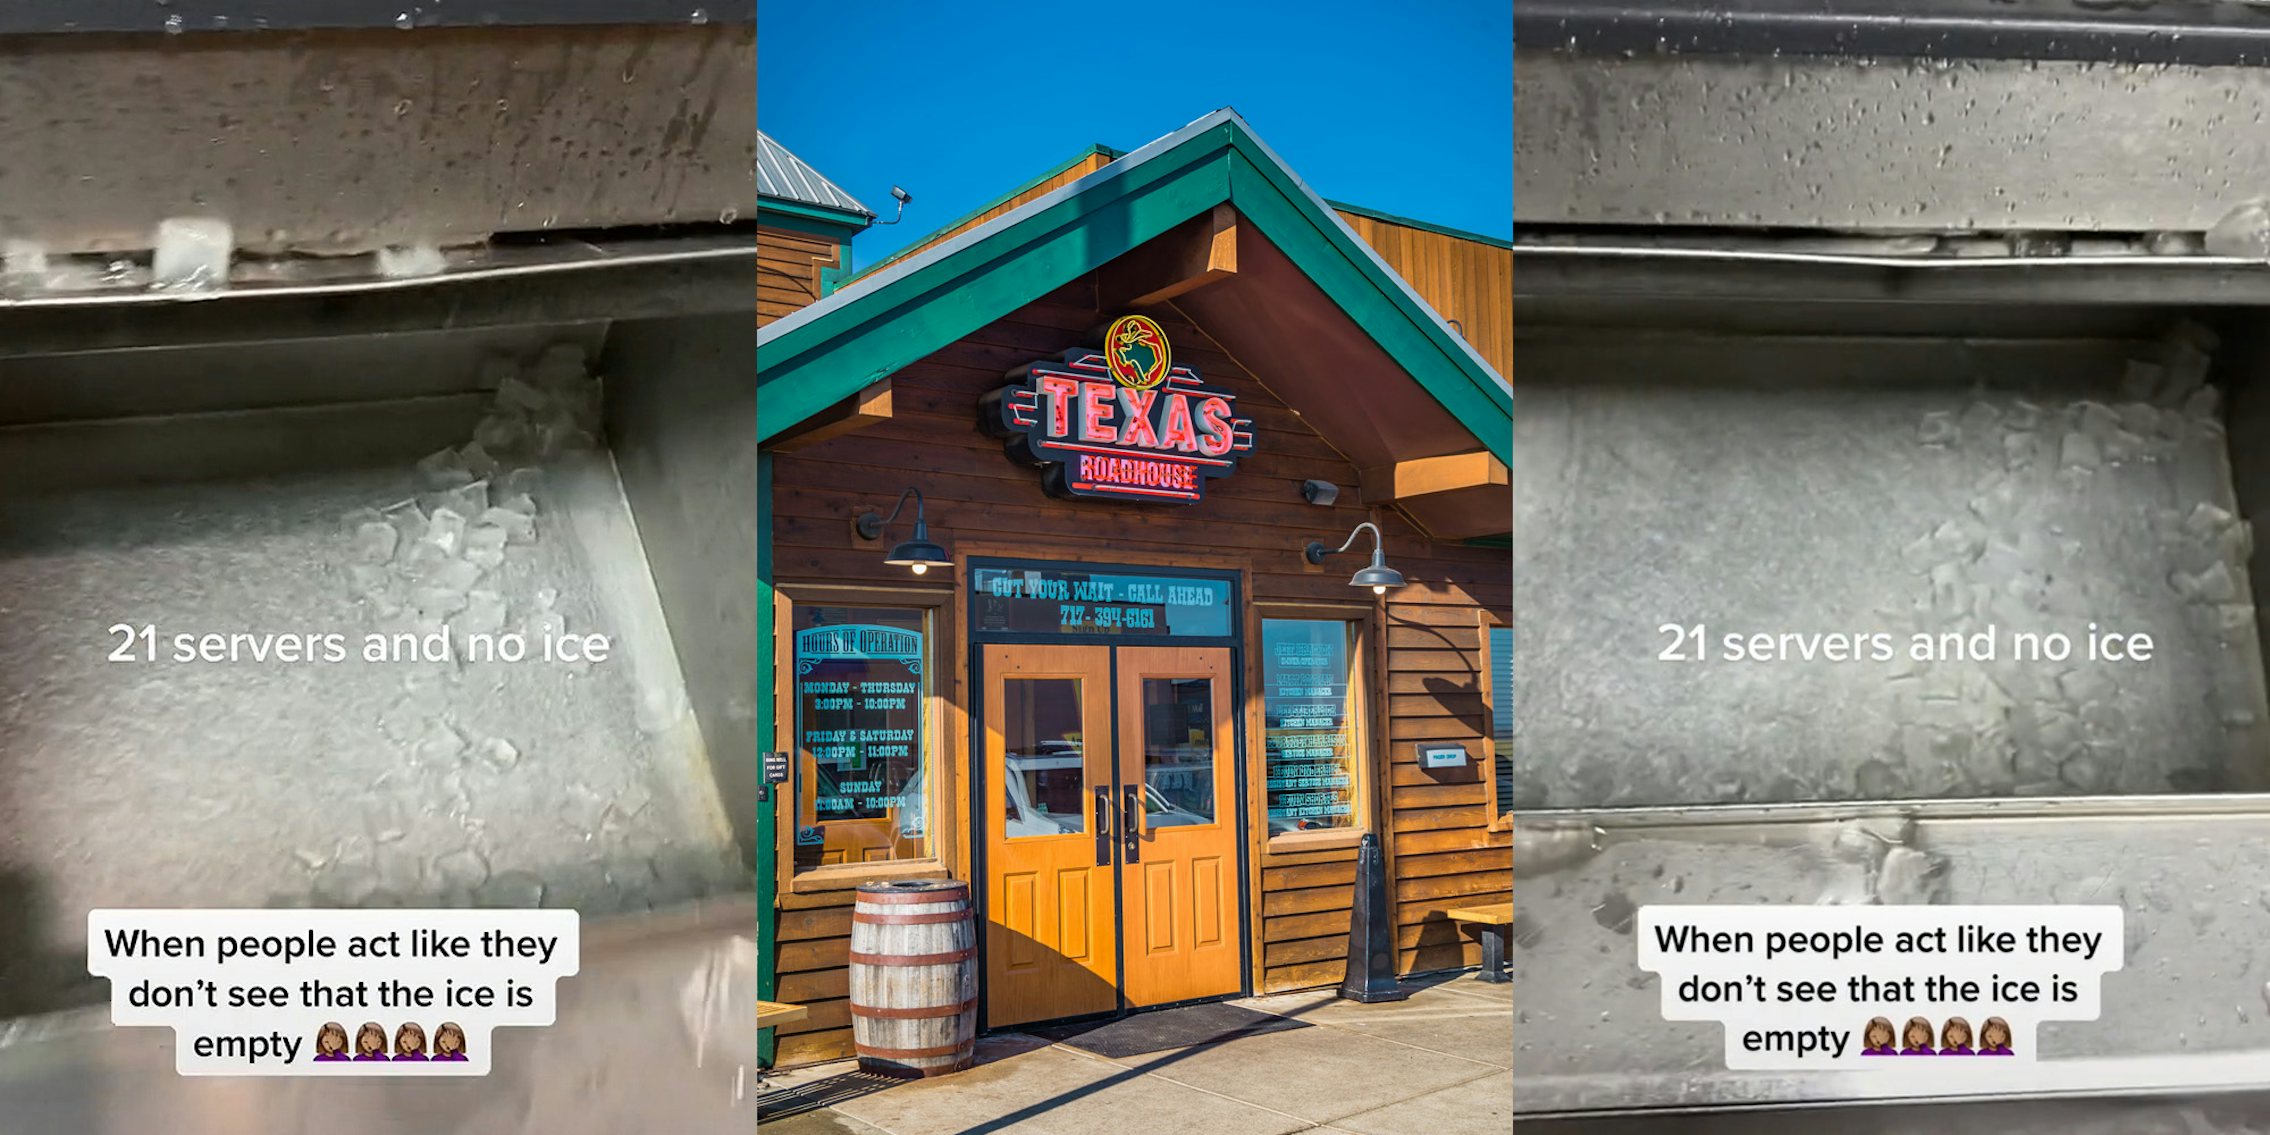 Texas Roadhouse ice container with no ice caption '21 servers and no ice' 'when people act like they don't see that the ice is empty' (l) Texas Roadhouse building with sign exterior (c)Texas Roadhouse ice container with no ice caption '21 servers and no ice' 'when people act like they don't see that the ice is empty' (r)